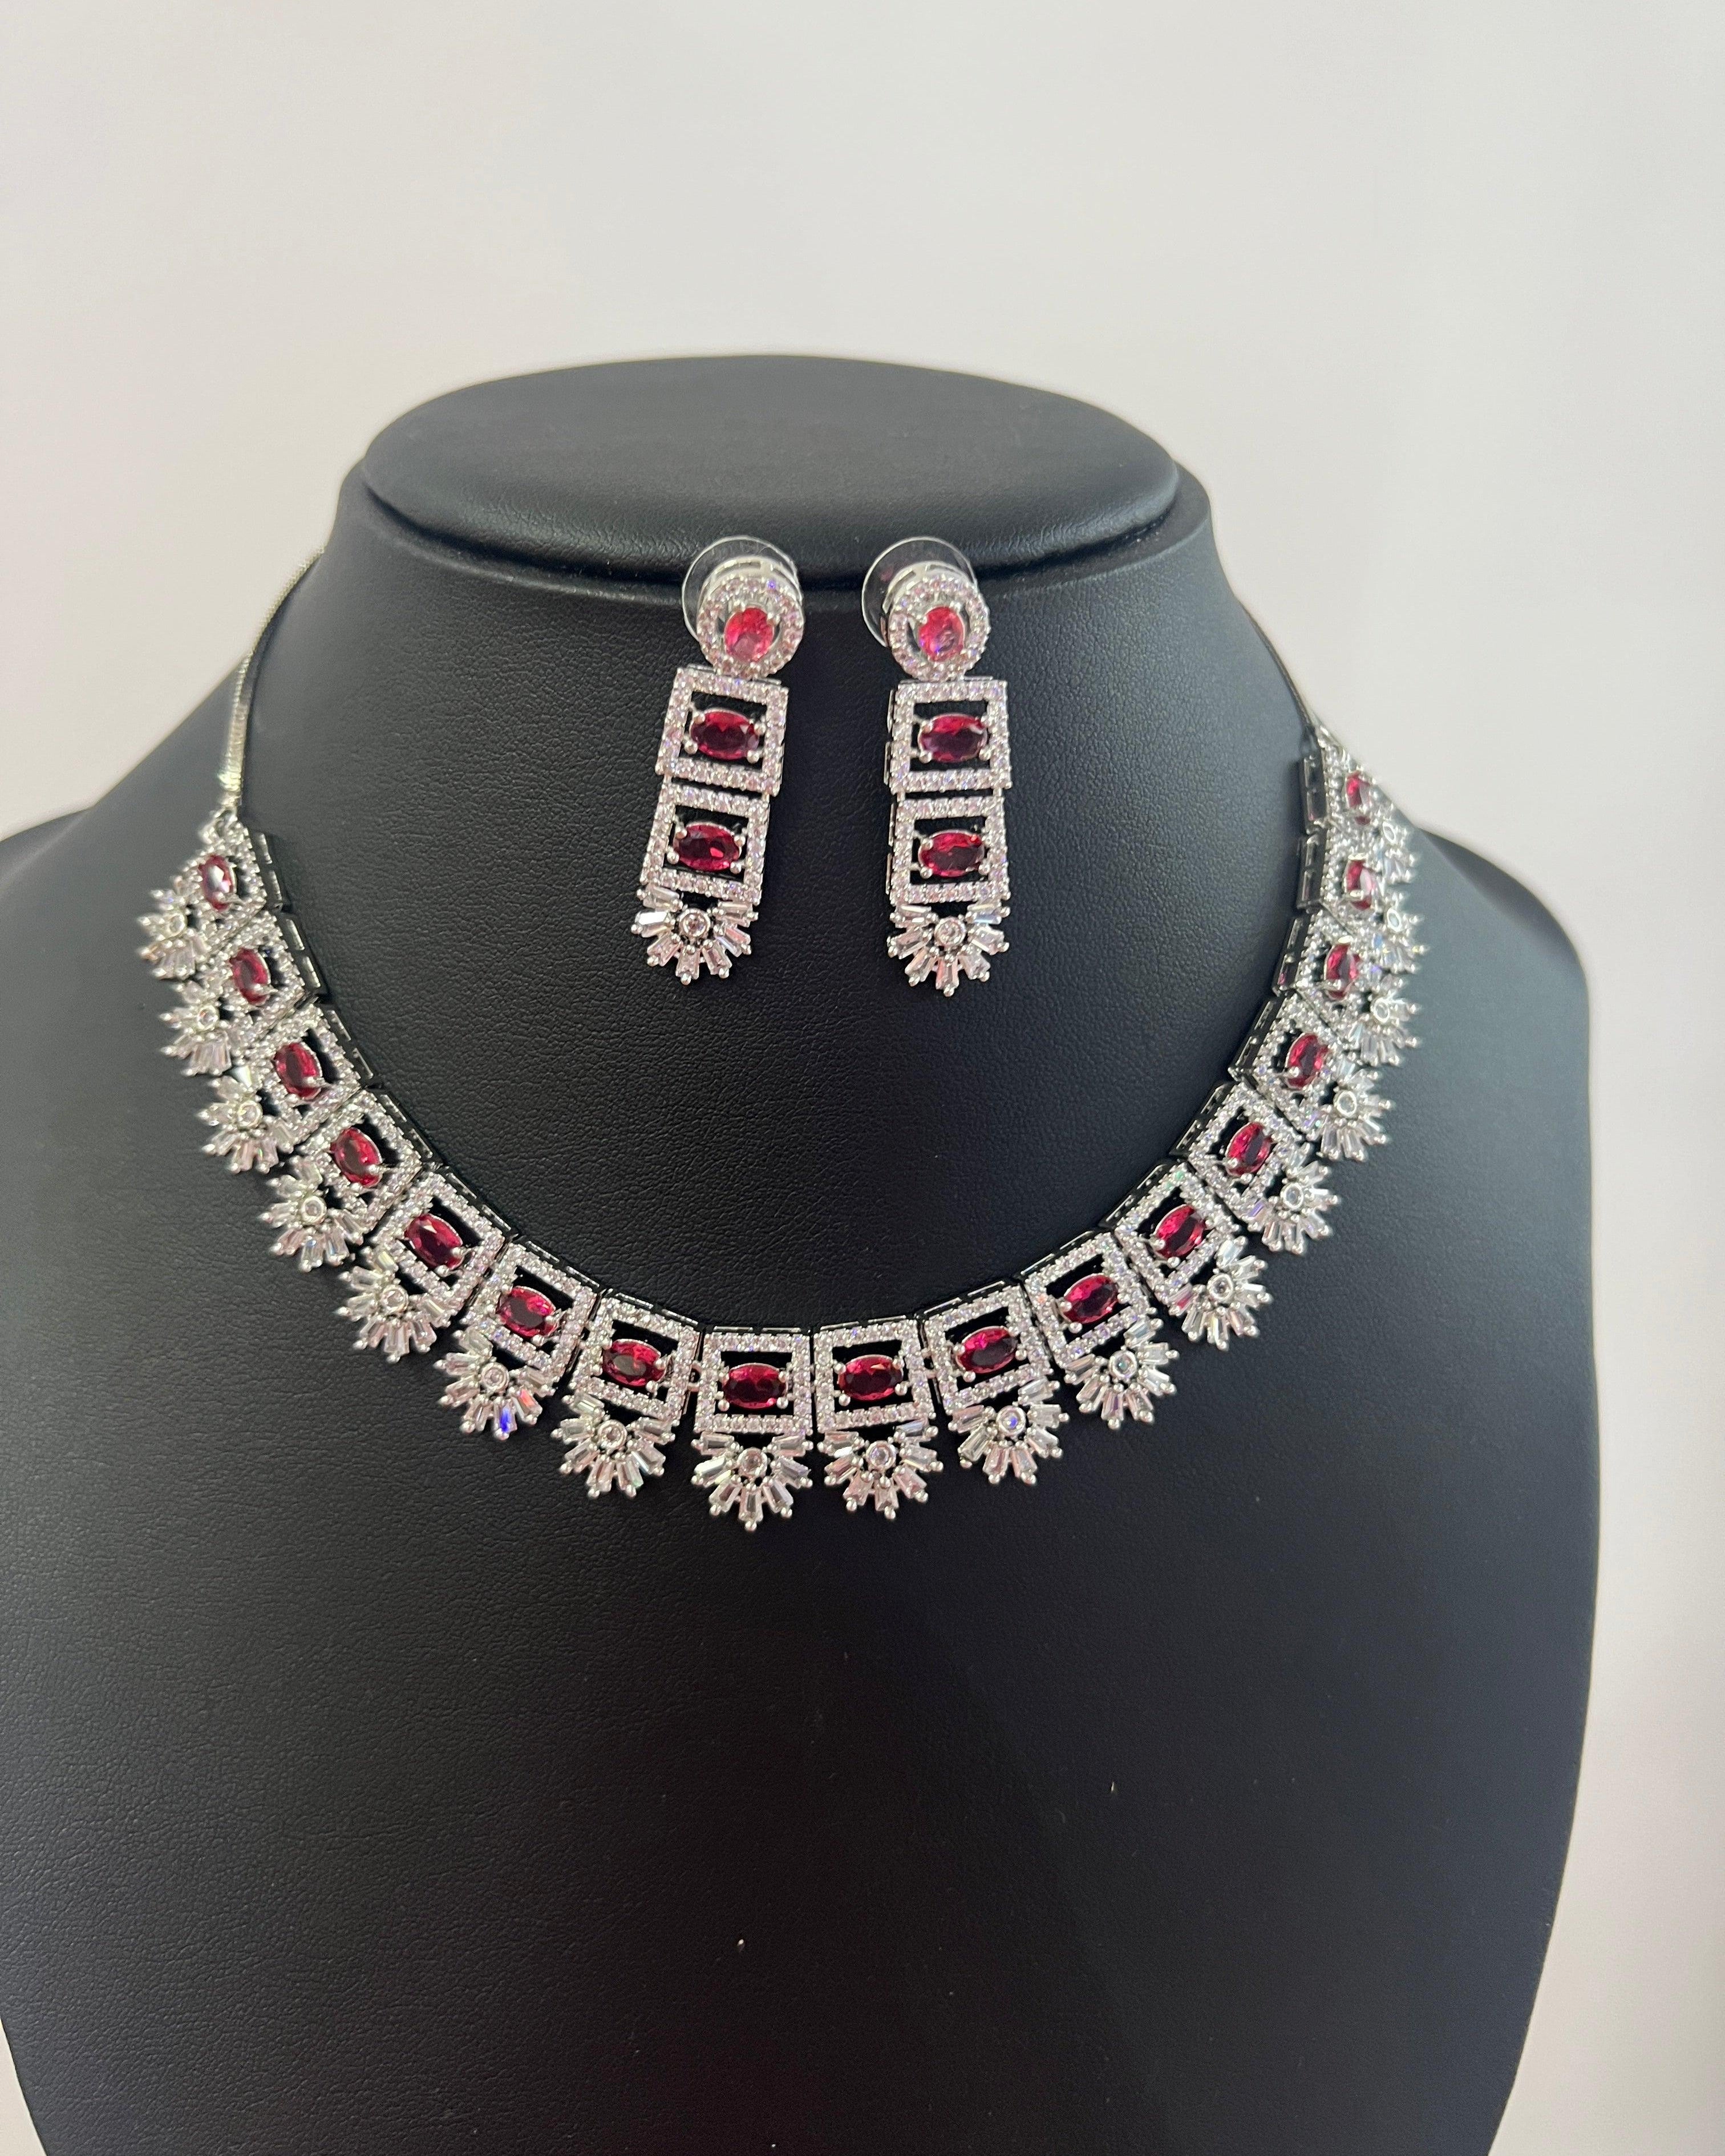 American Diamond Necklace Set with Red Stone - Boutique Nepal Australia 